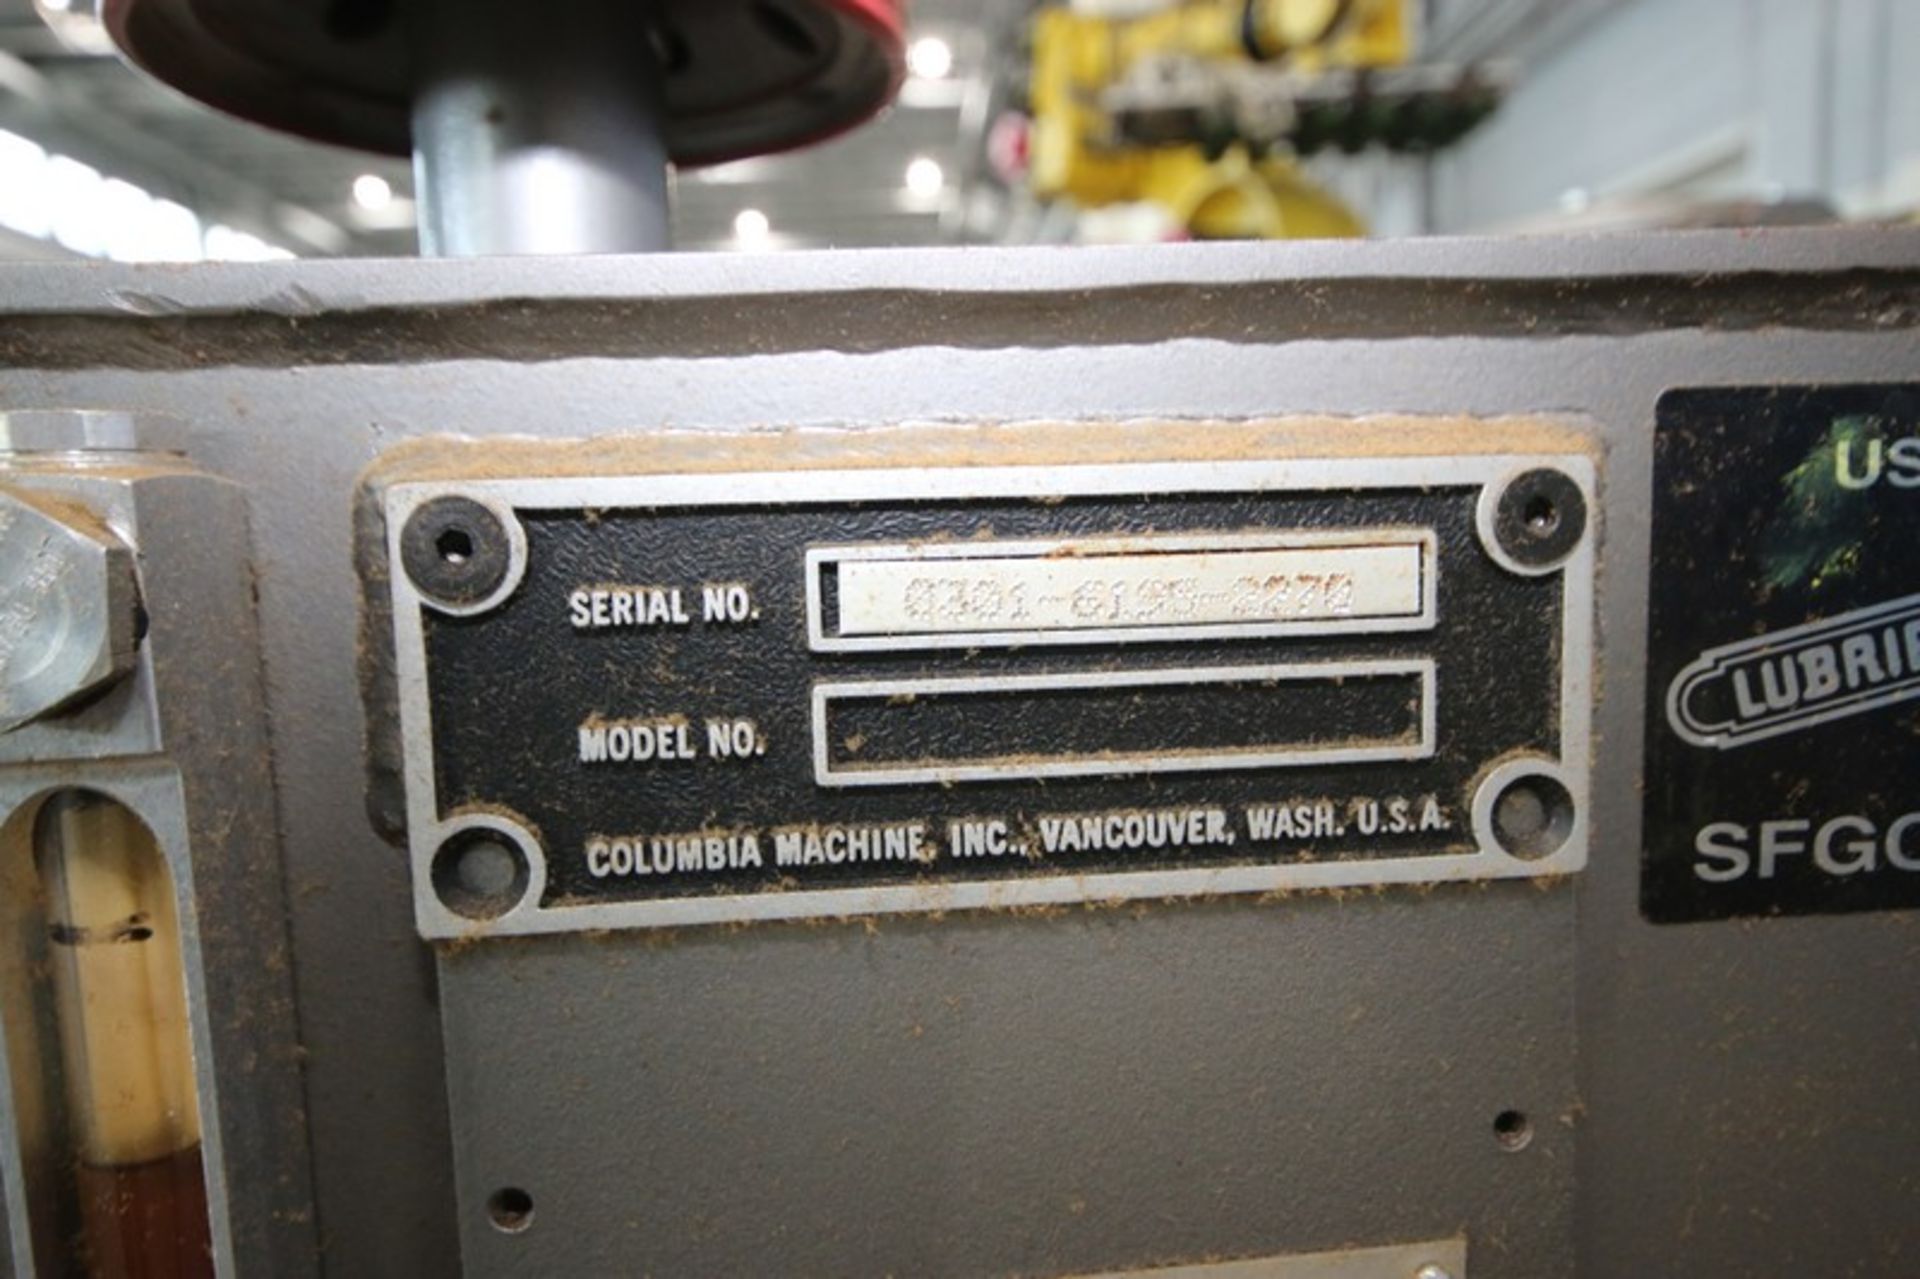 Columbia Hydraulic Power Unit, S/N 0301-6195-2270, Reservoir Cap. 100, with 15 hp Pump, with - Image 7 of 7